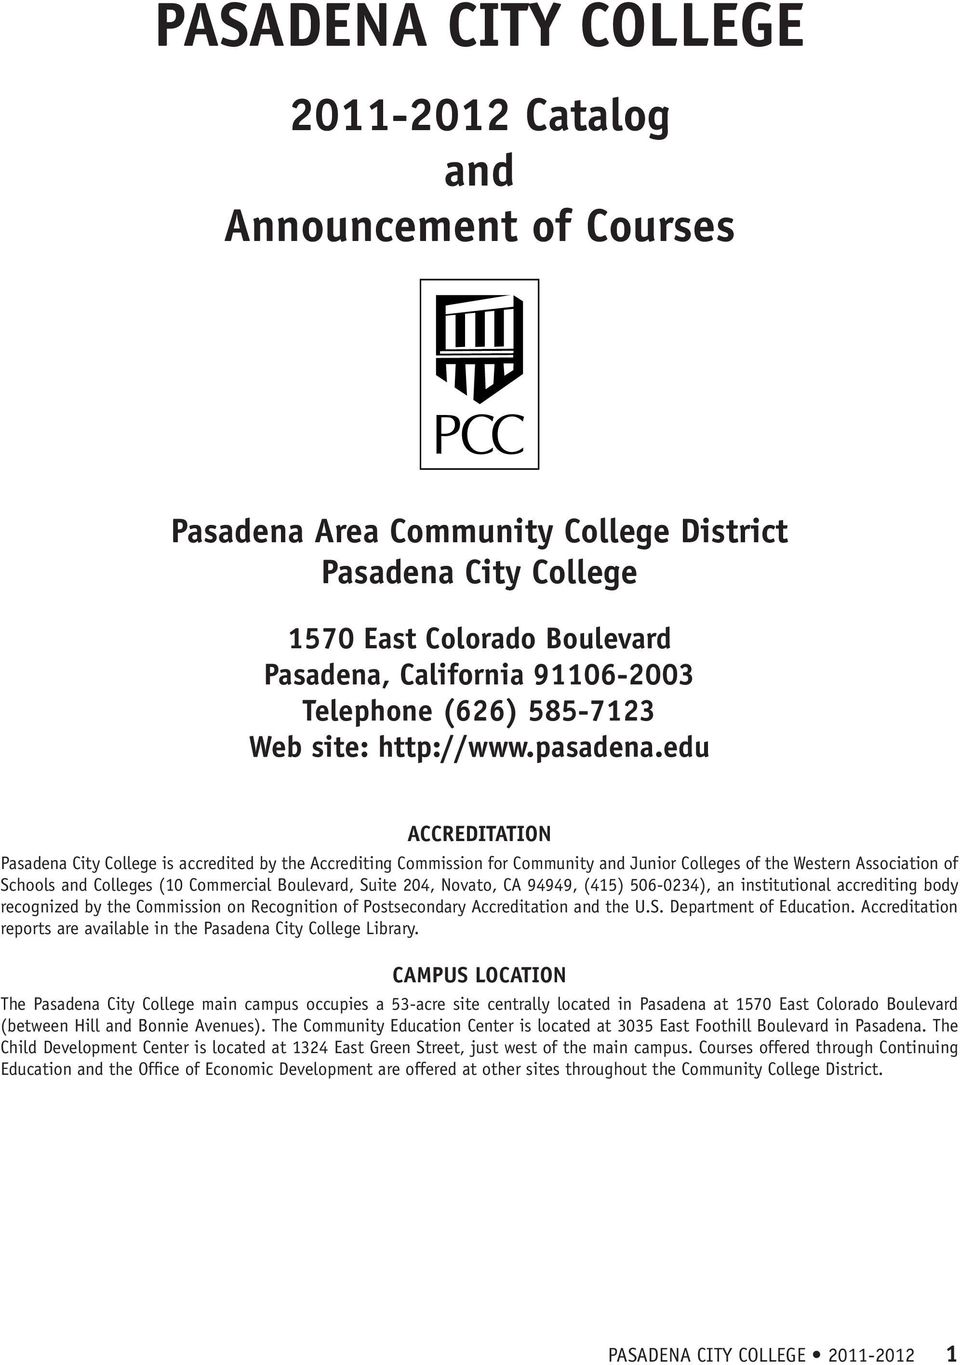 edu ACCREDITATION Pasadena City College is accredited by the Accrediting Commission for Community and Junior Colleges of the Western Association of Schools and Colleges (10 Commercial Boulevard,